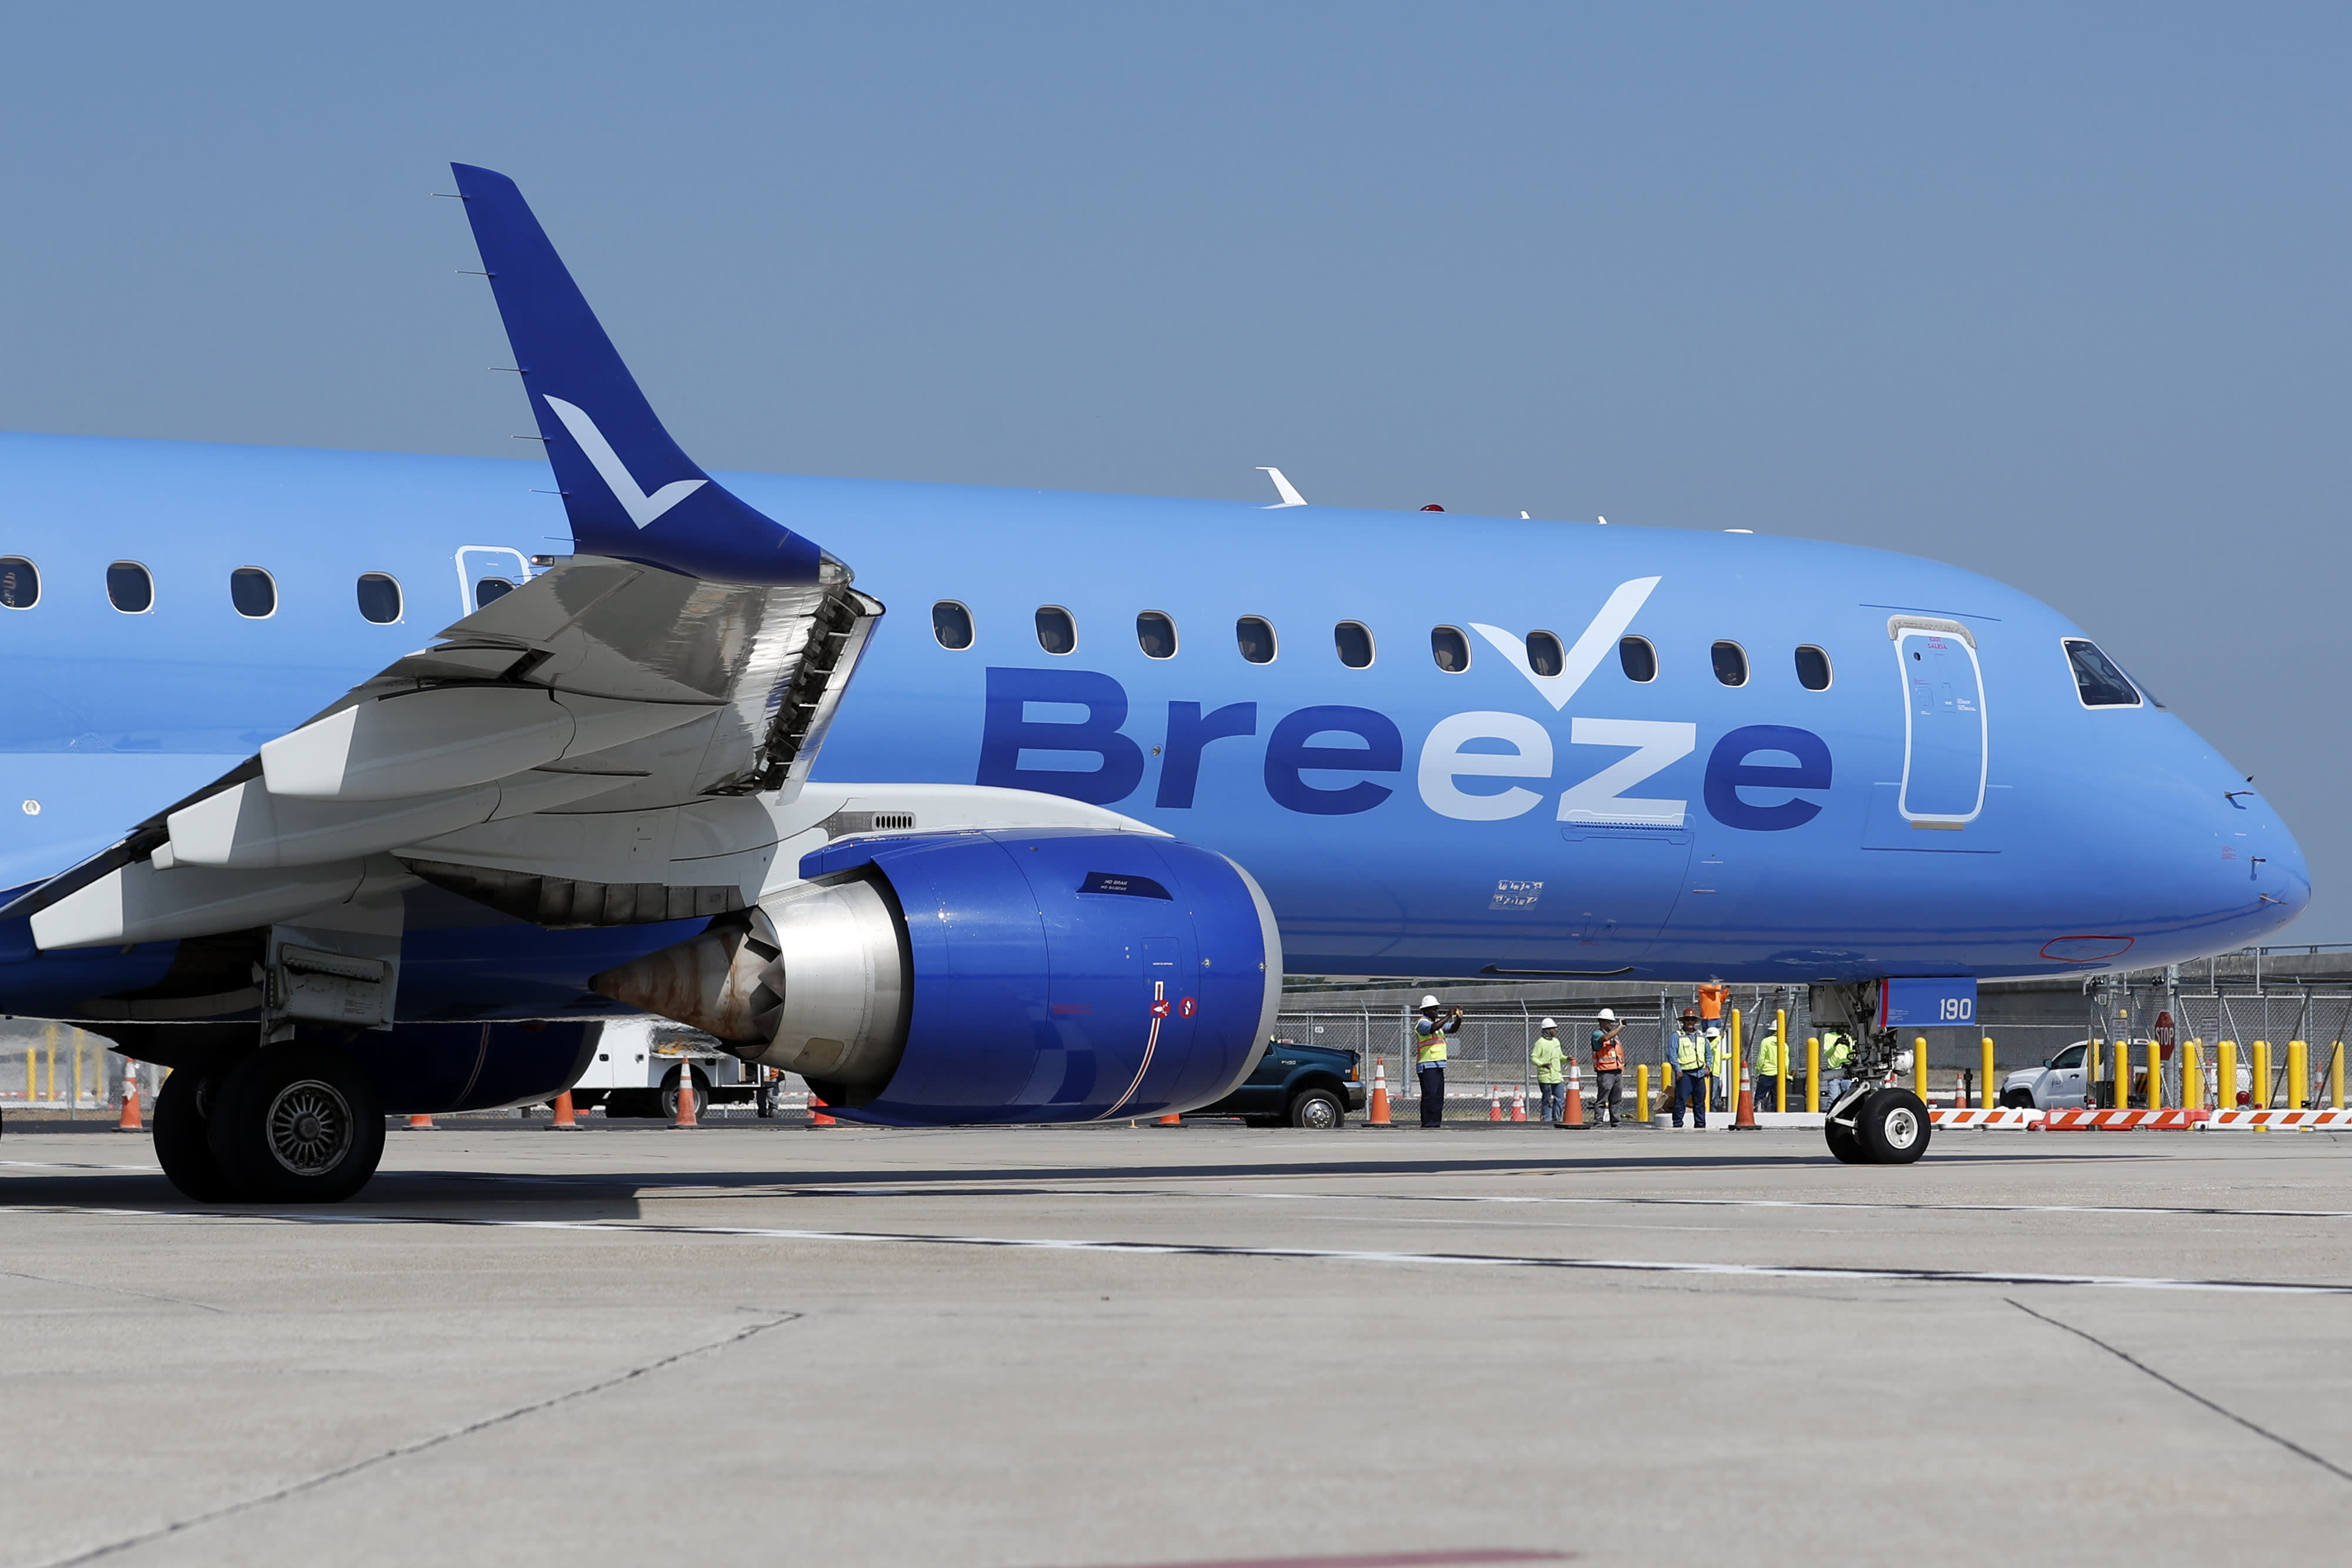 Low-cost Breeze Airways arrives at DFW with twice-weekly flights to
Salt Lake City